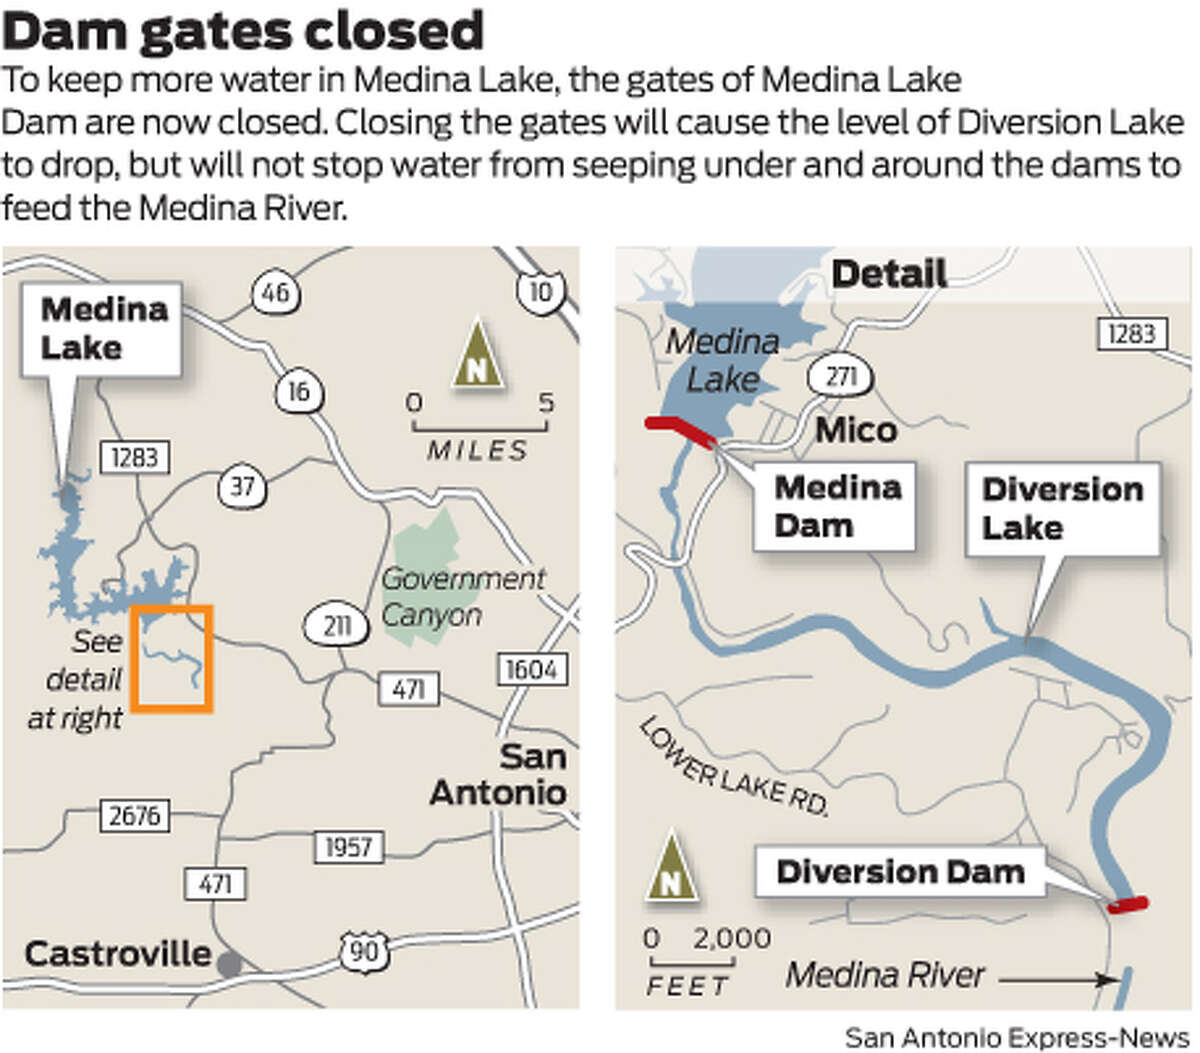 To keep more water in Medina Lake, the gates of Medina Lake Dam are now closed. Closing the gates will cause the level of Diversion Lake to drop, but will not stop water from seeping under and around the dams to feed the Medina River. 